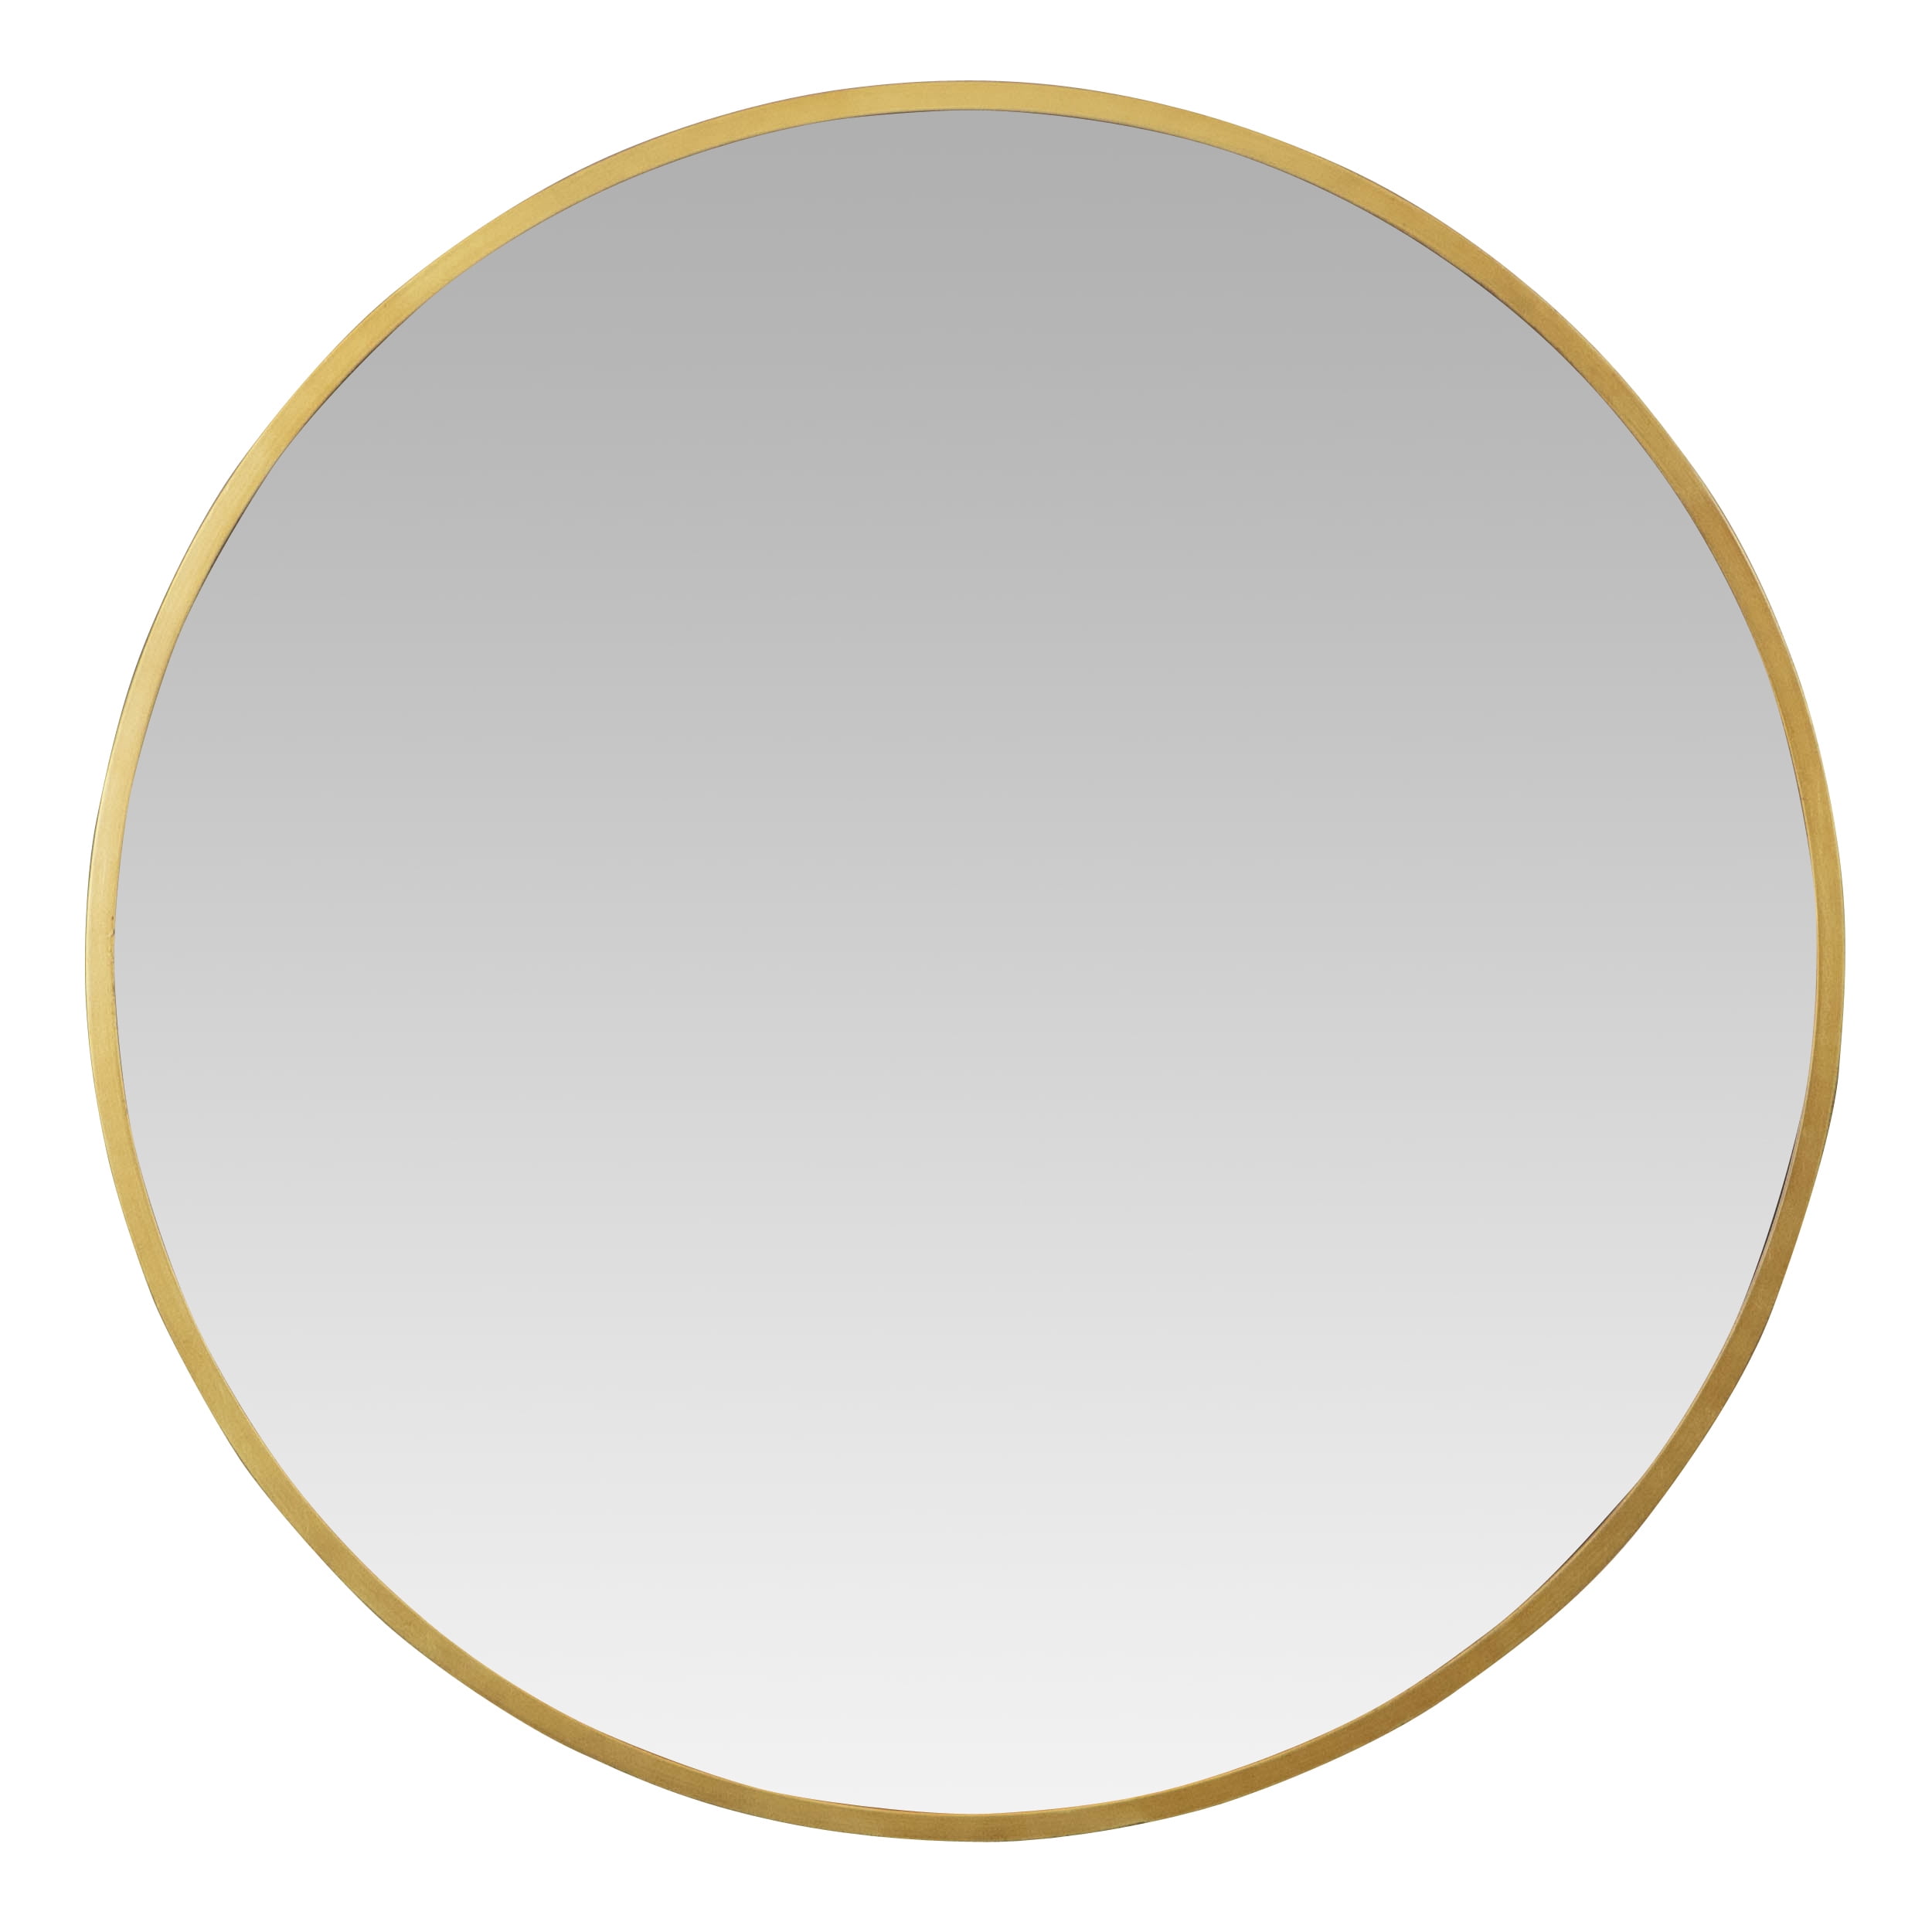 Picture of Aspire Home Accents 7500 Bali Modern Round Wall Mirror, Gold - 32 in.